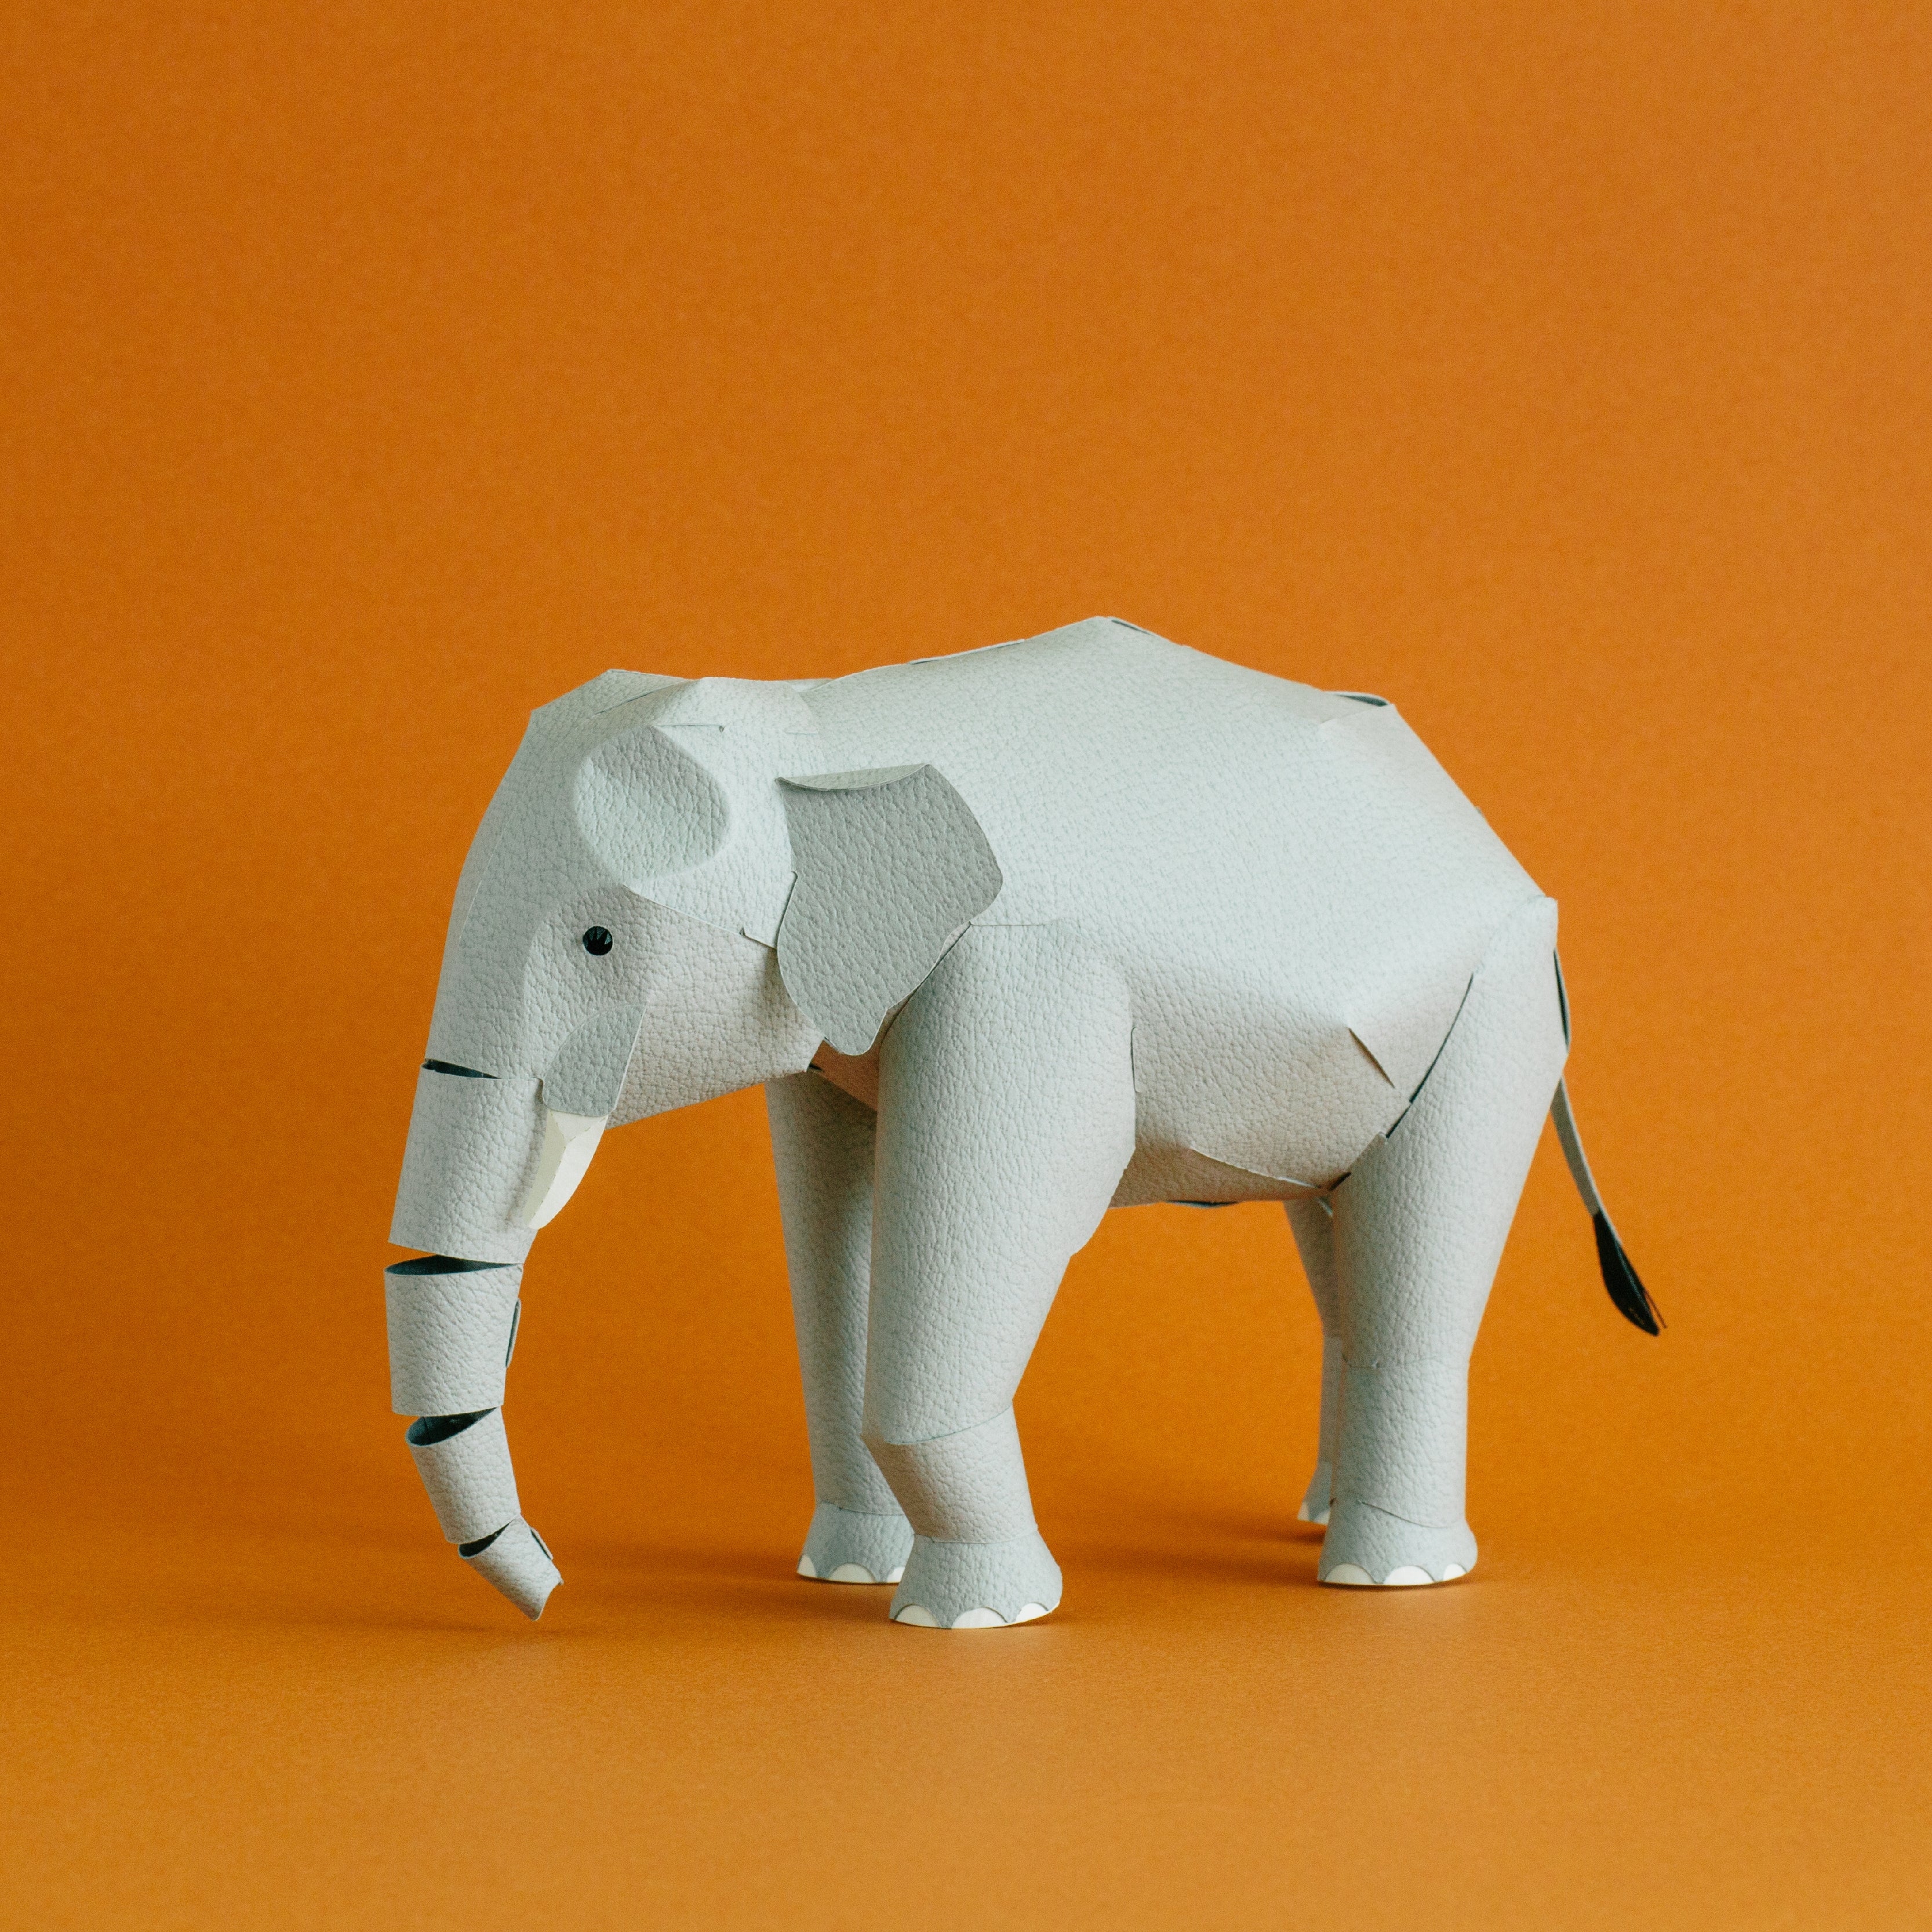 TOP TO TAIL ELEPHANT